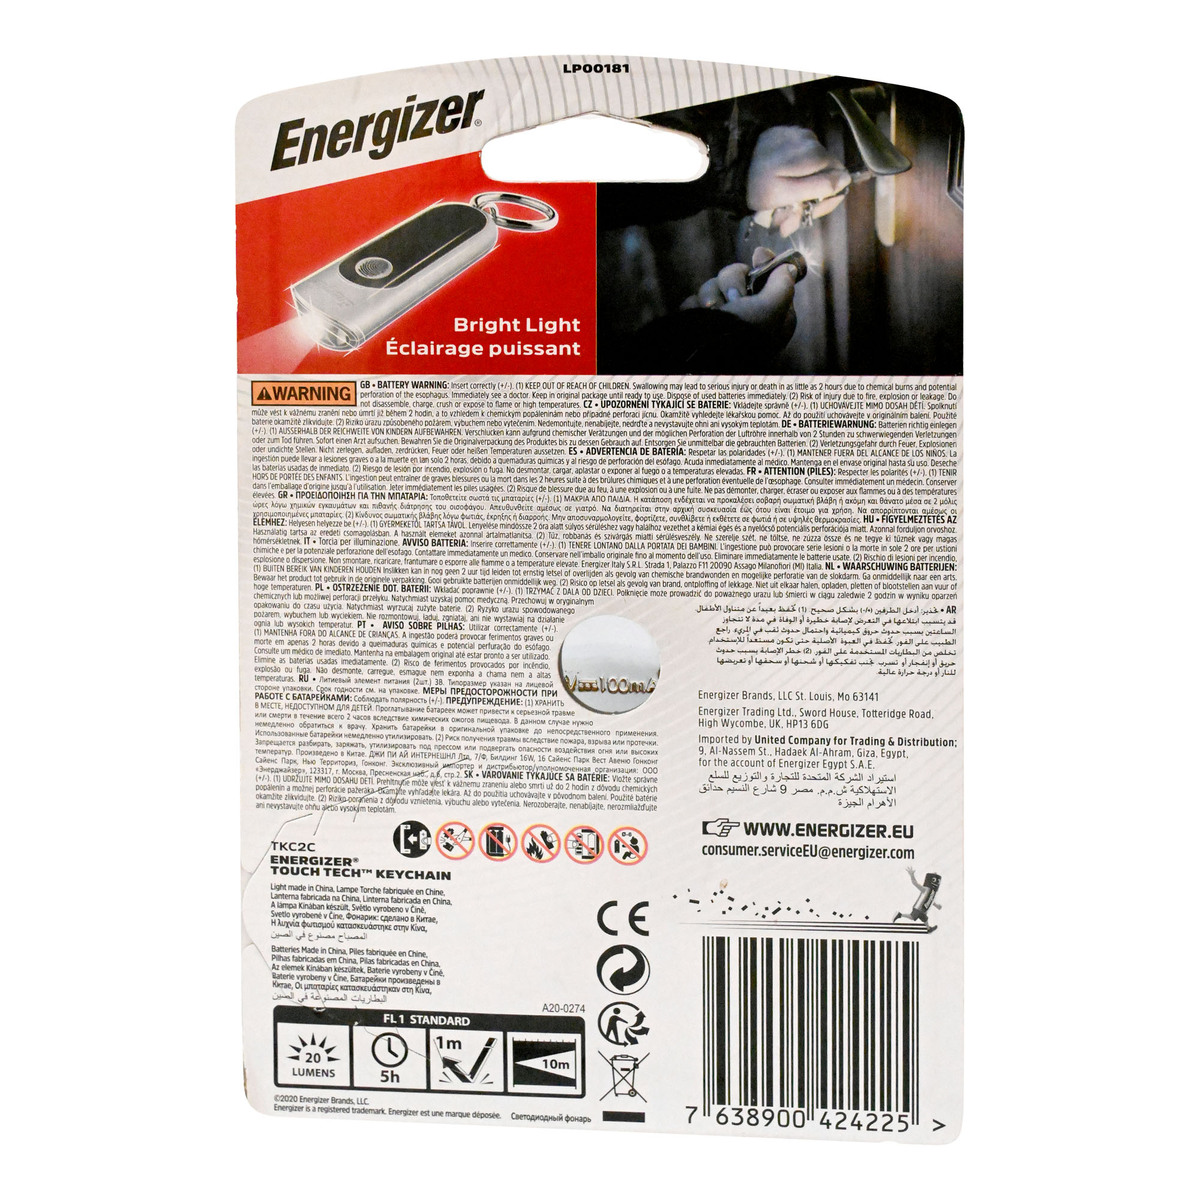 Energizer Keychain Light with Touch Tech Technology, TKC2C